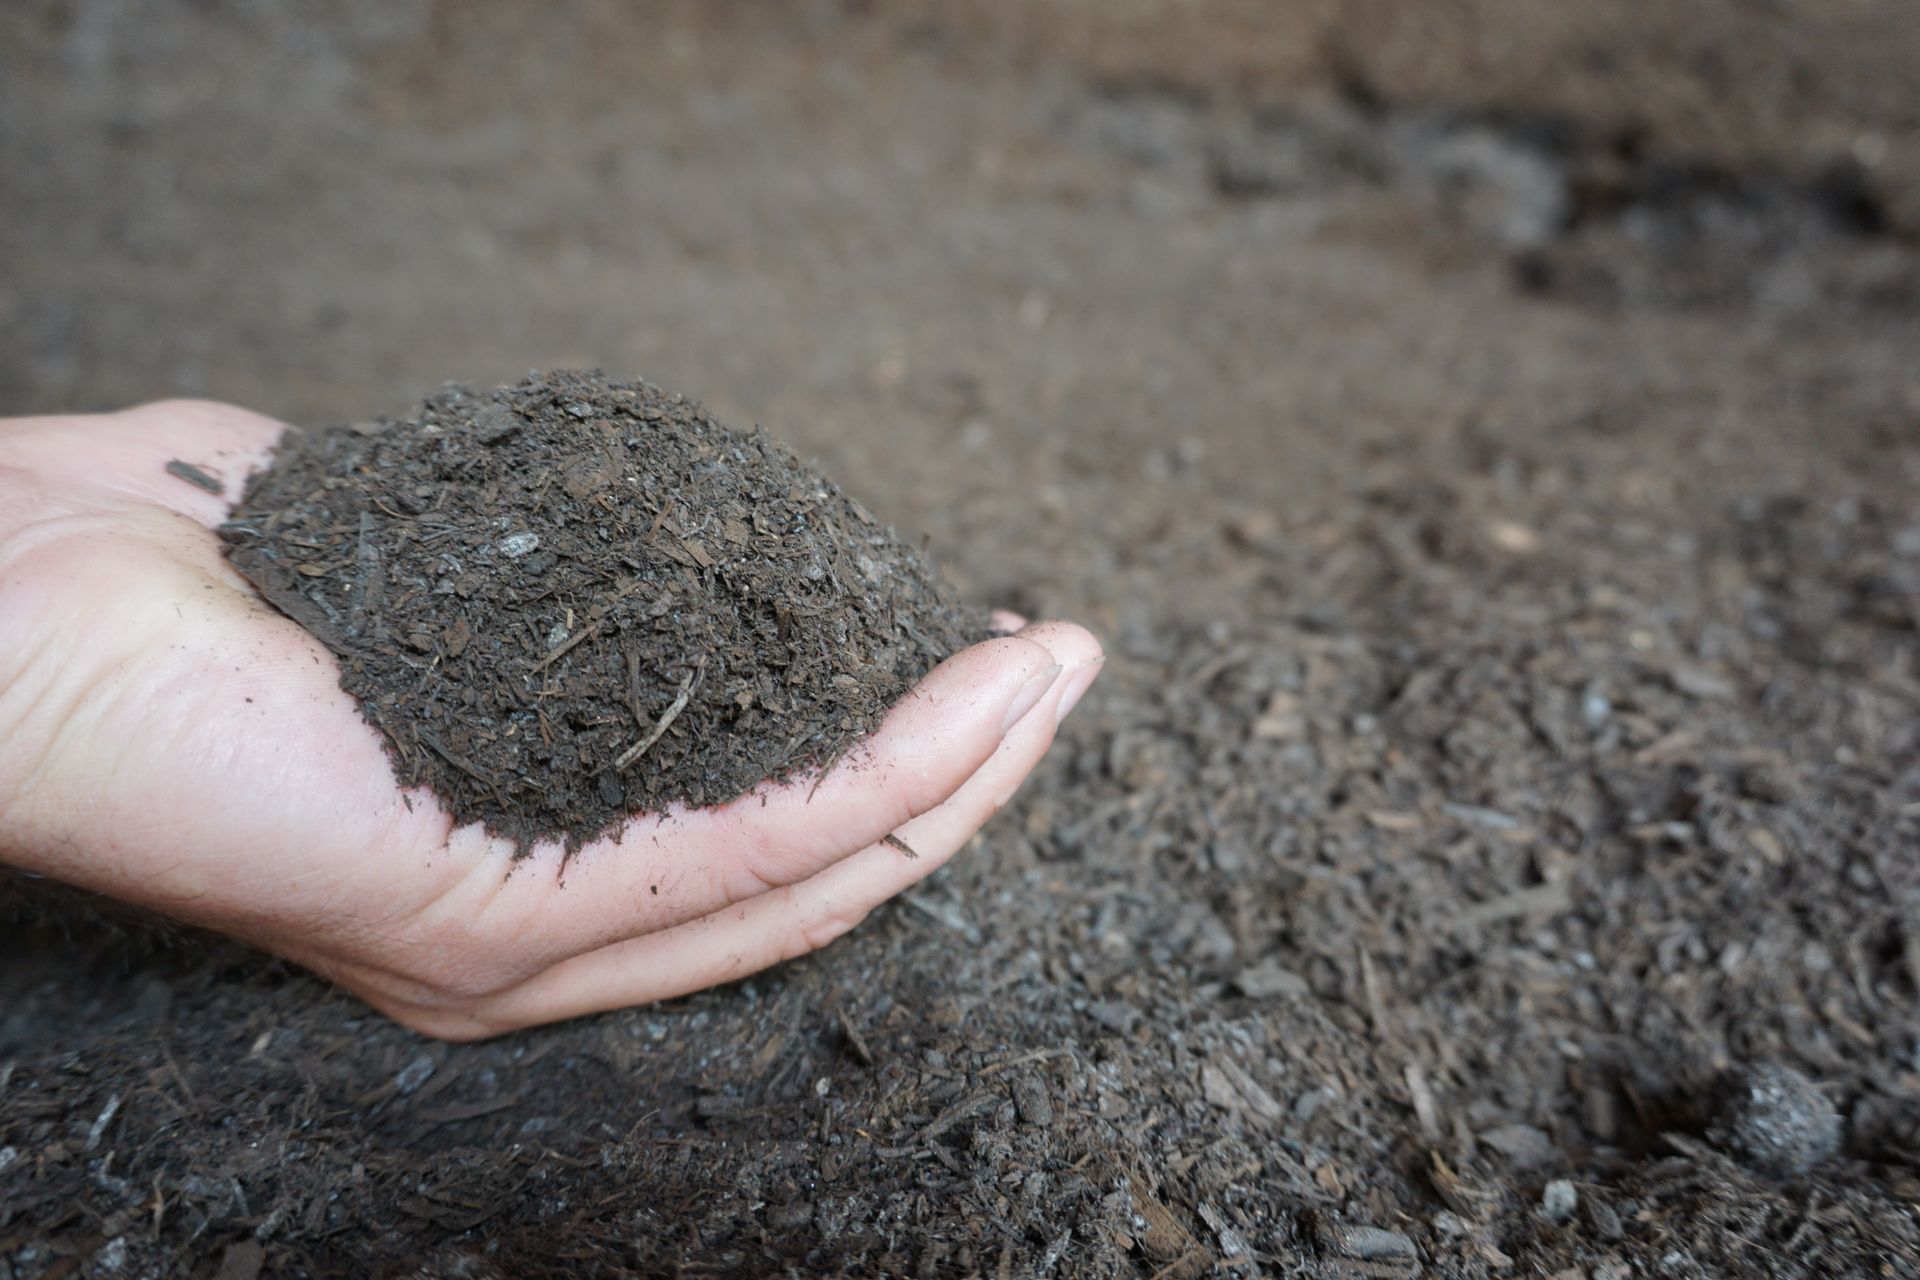 Bulk Organic Compost For Sale near me delivered to Lebanon, Annville, Palmyra, & Cornwall.